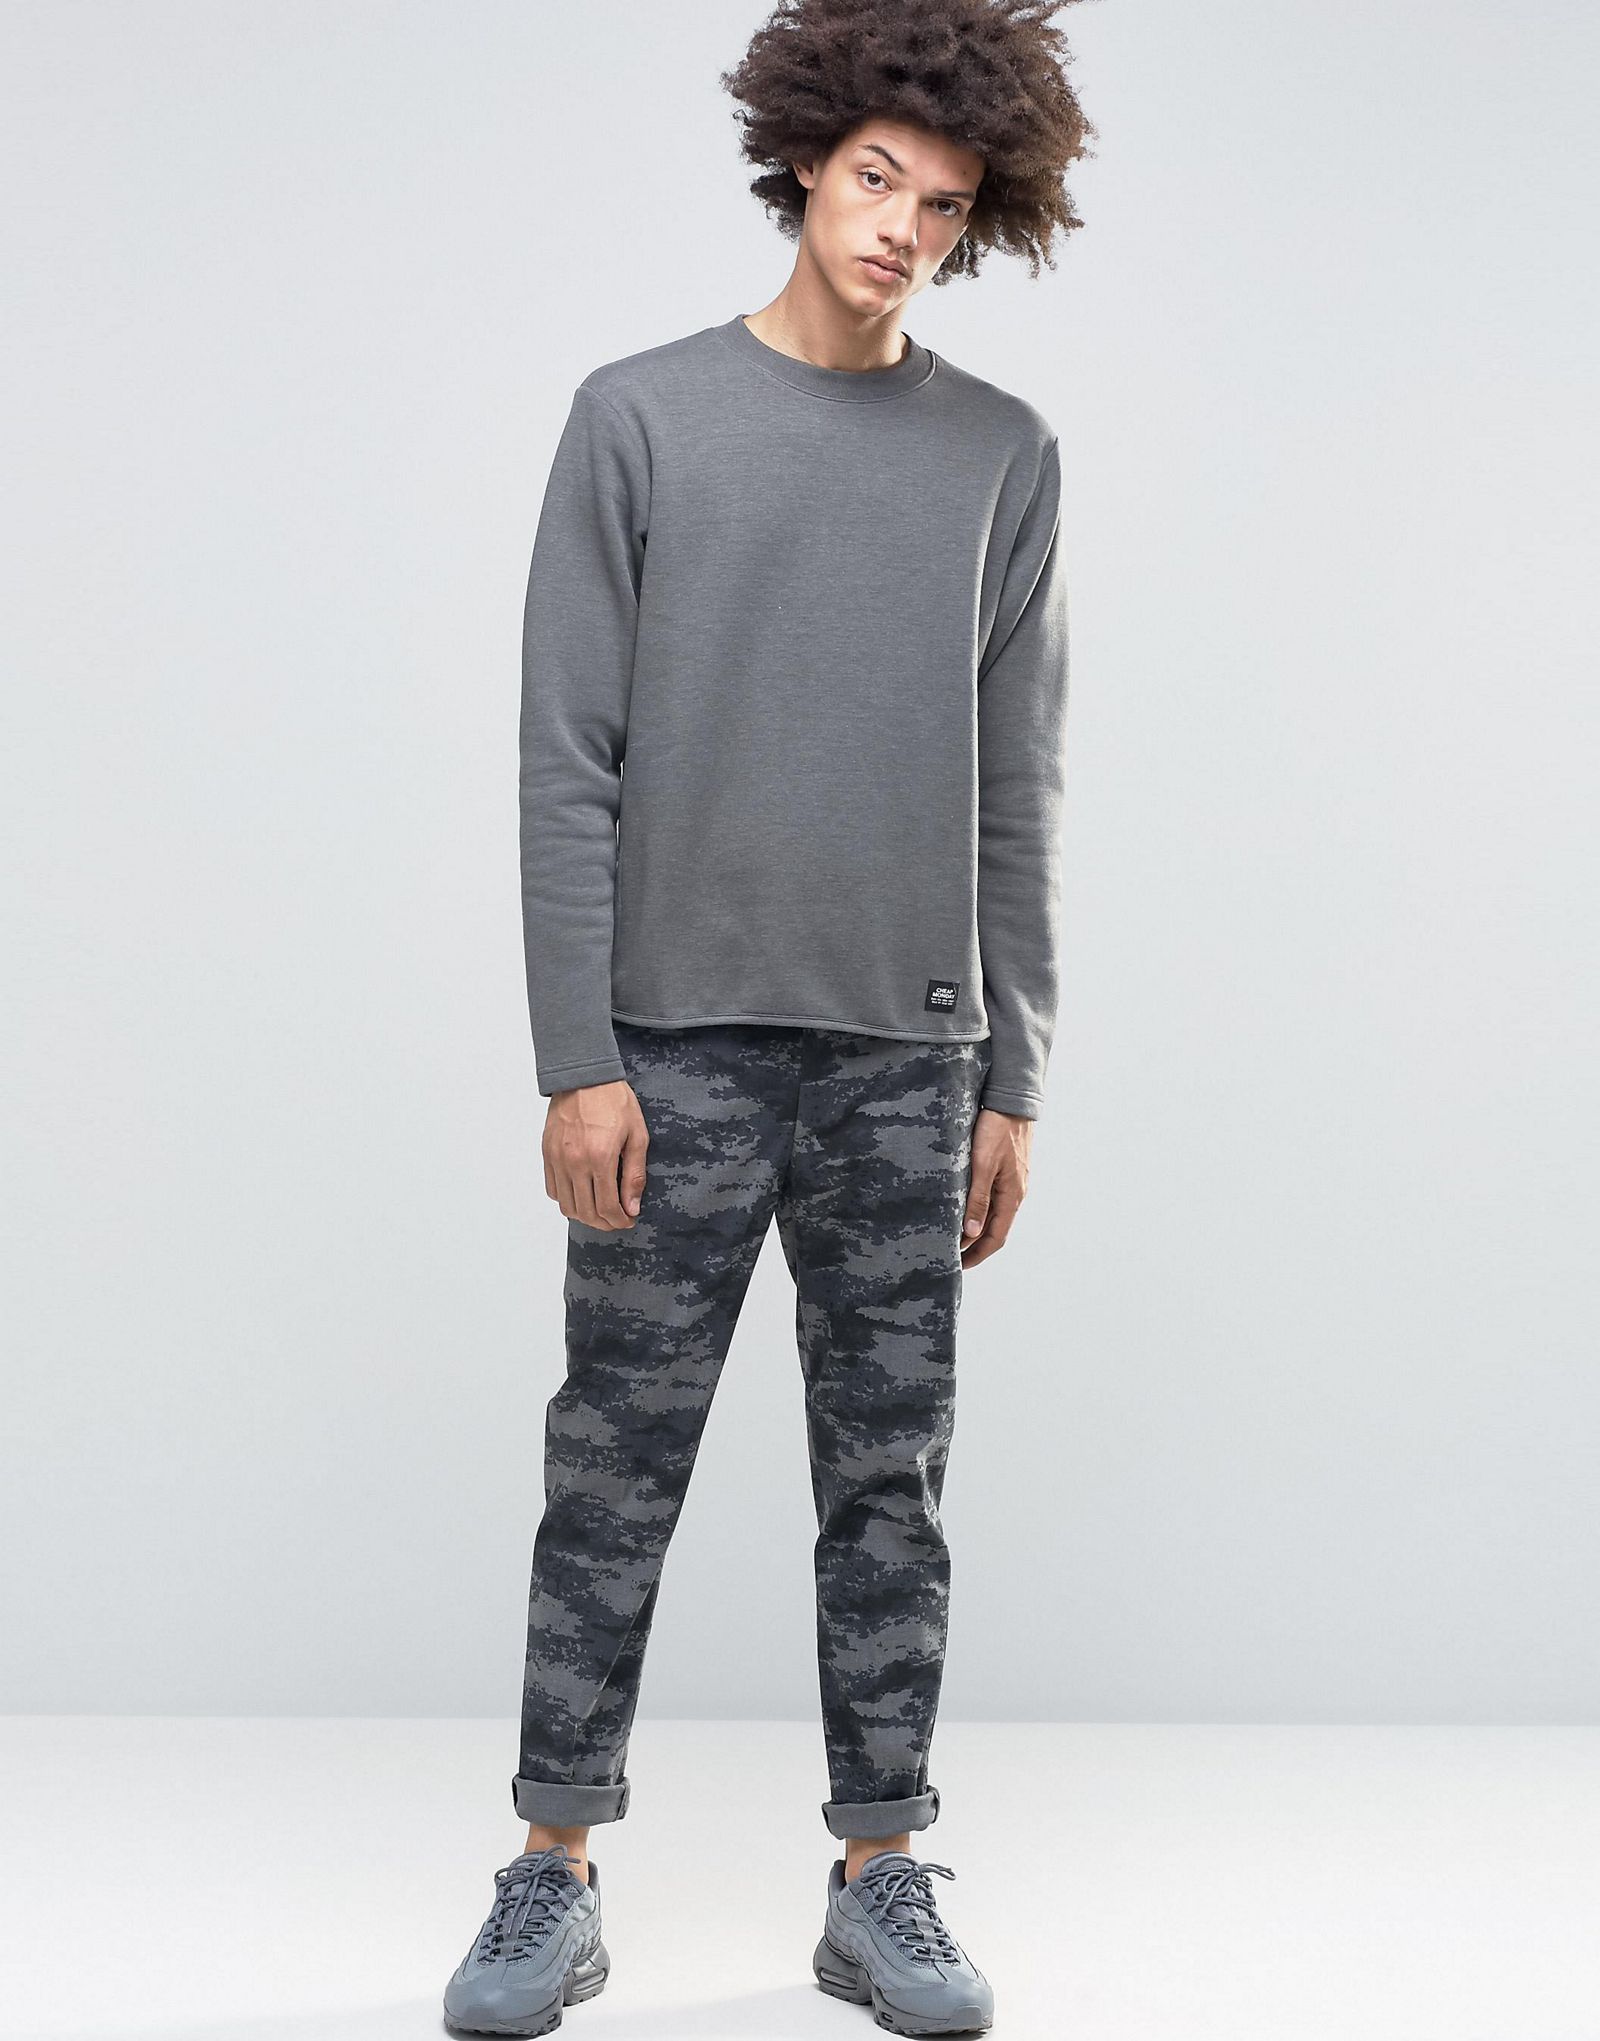 Cheap Monday Oversee Sweatshirt Side Zips Curved Tail Grey